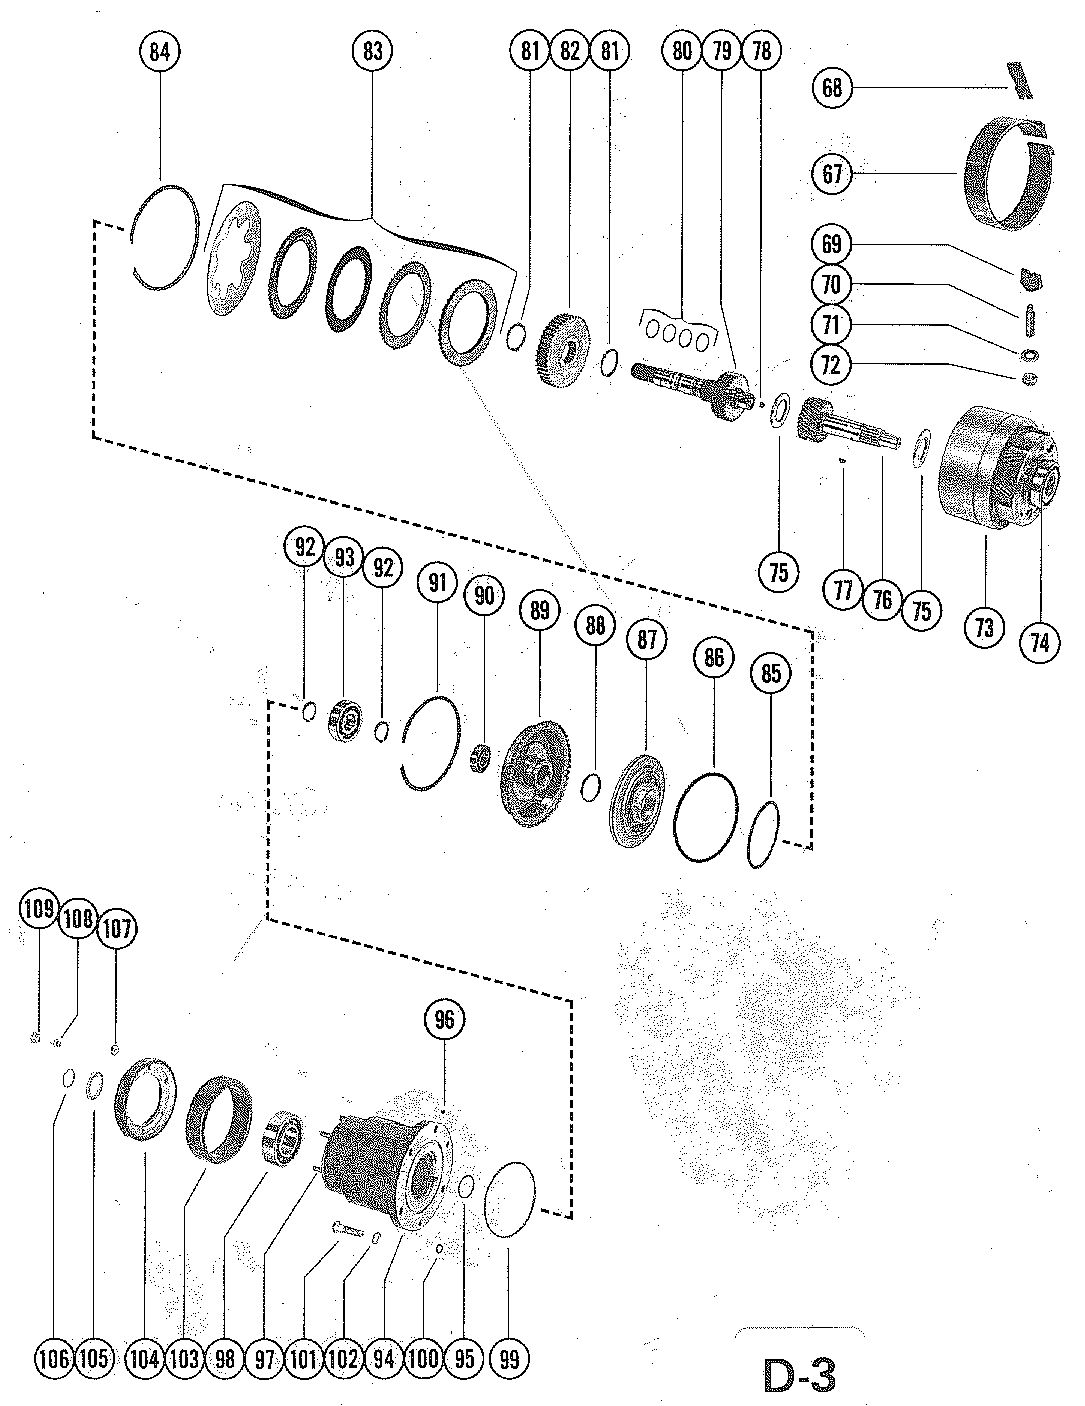 MERCRUISER 228 ENGINE (G.M.) TRANSMISSION ASSEMBLY (STERN DRIVE) PAGE 2